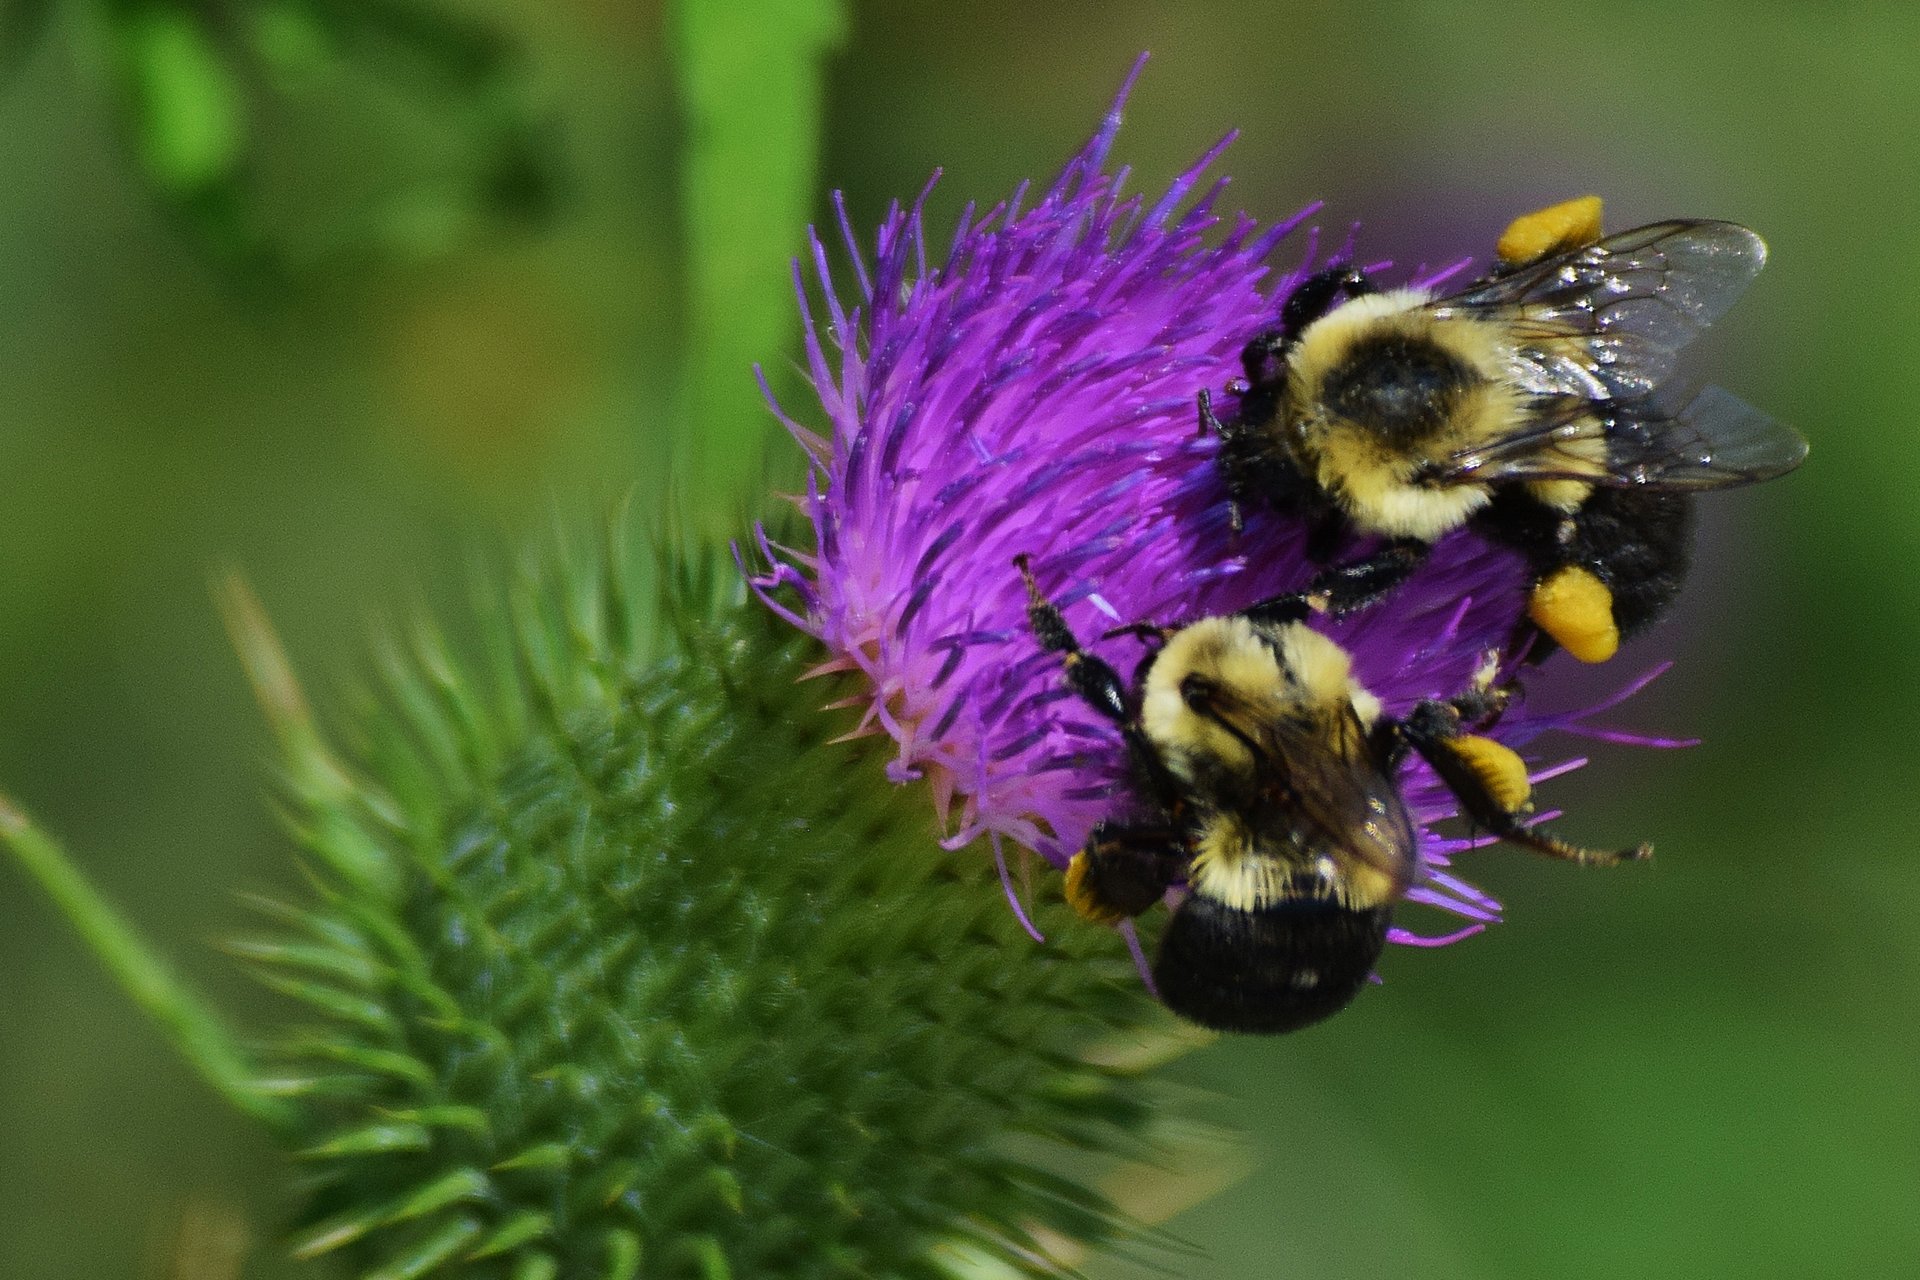 Two bumblebees on a purple flower